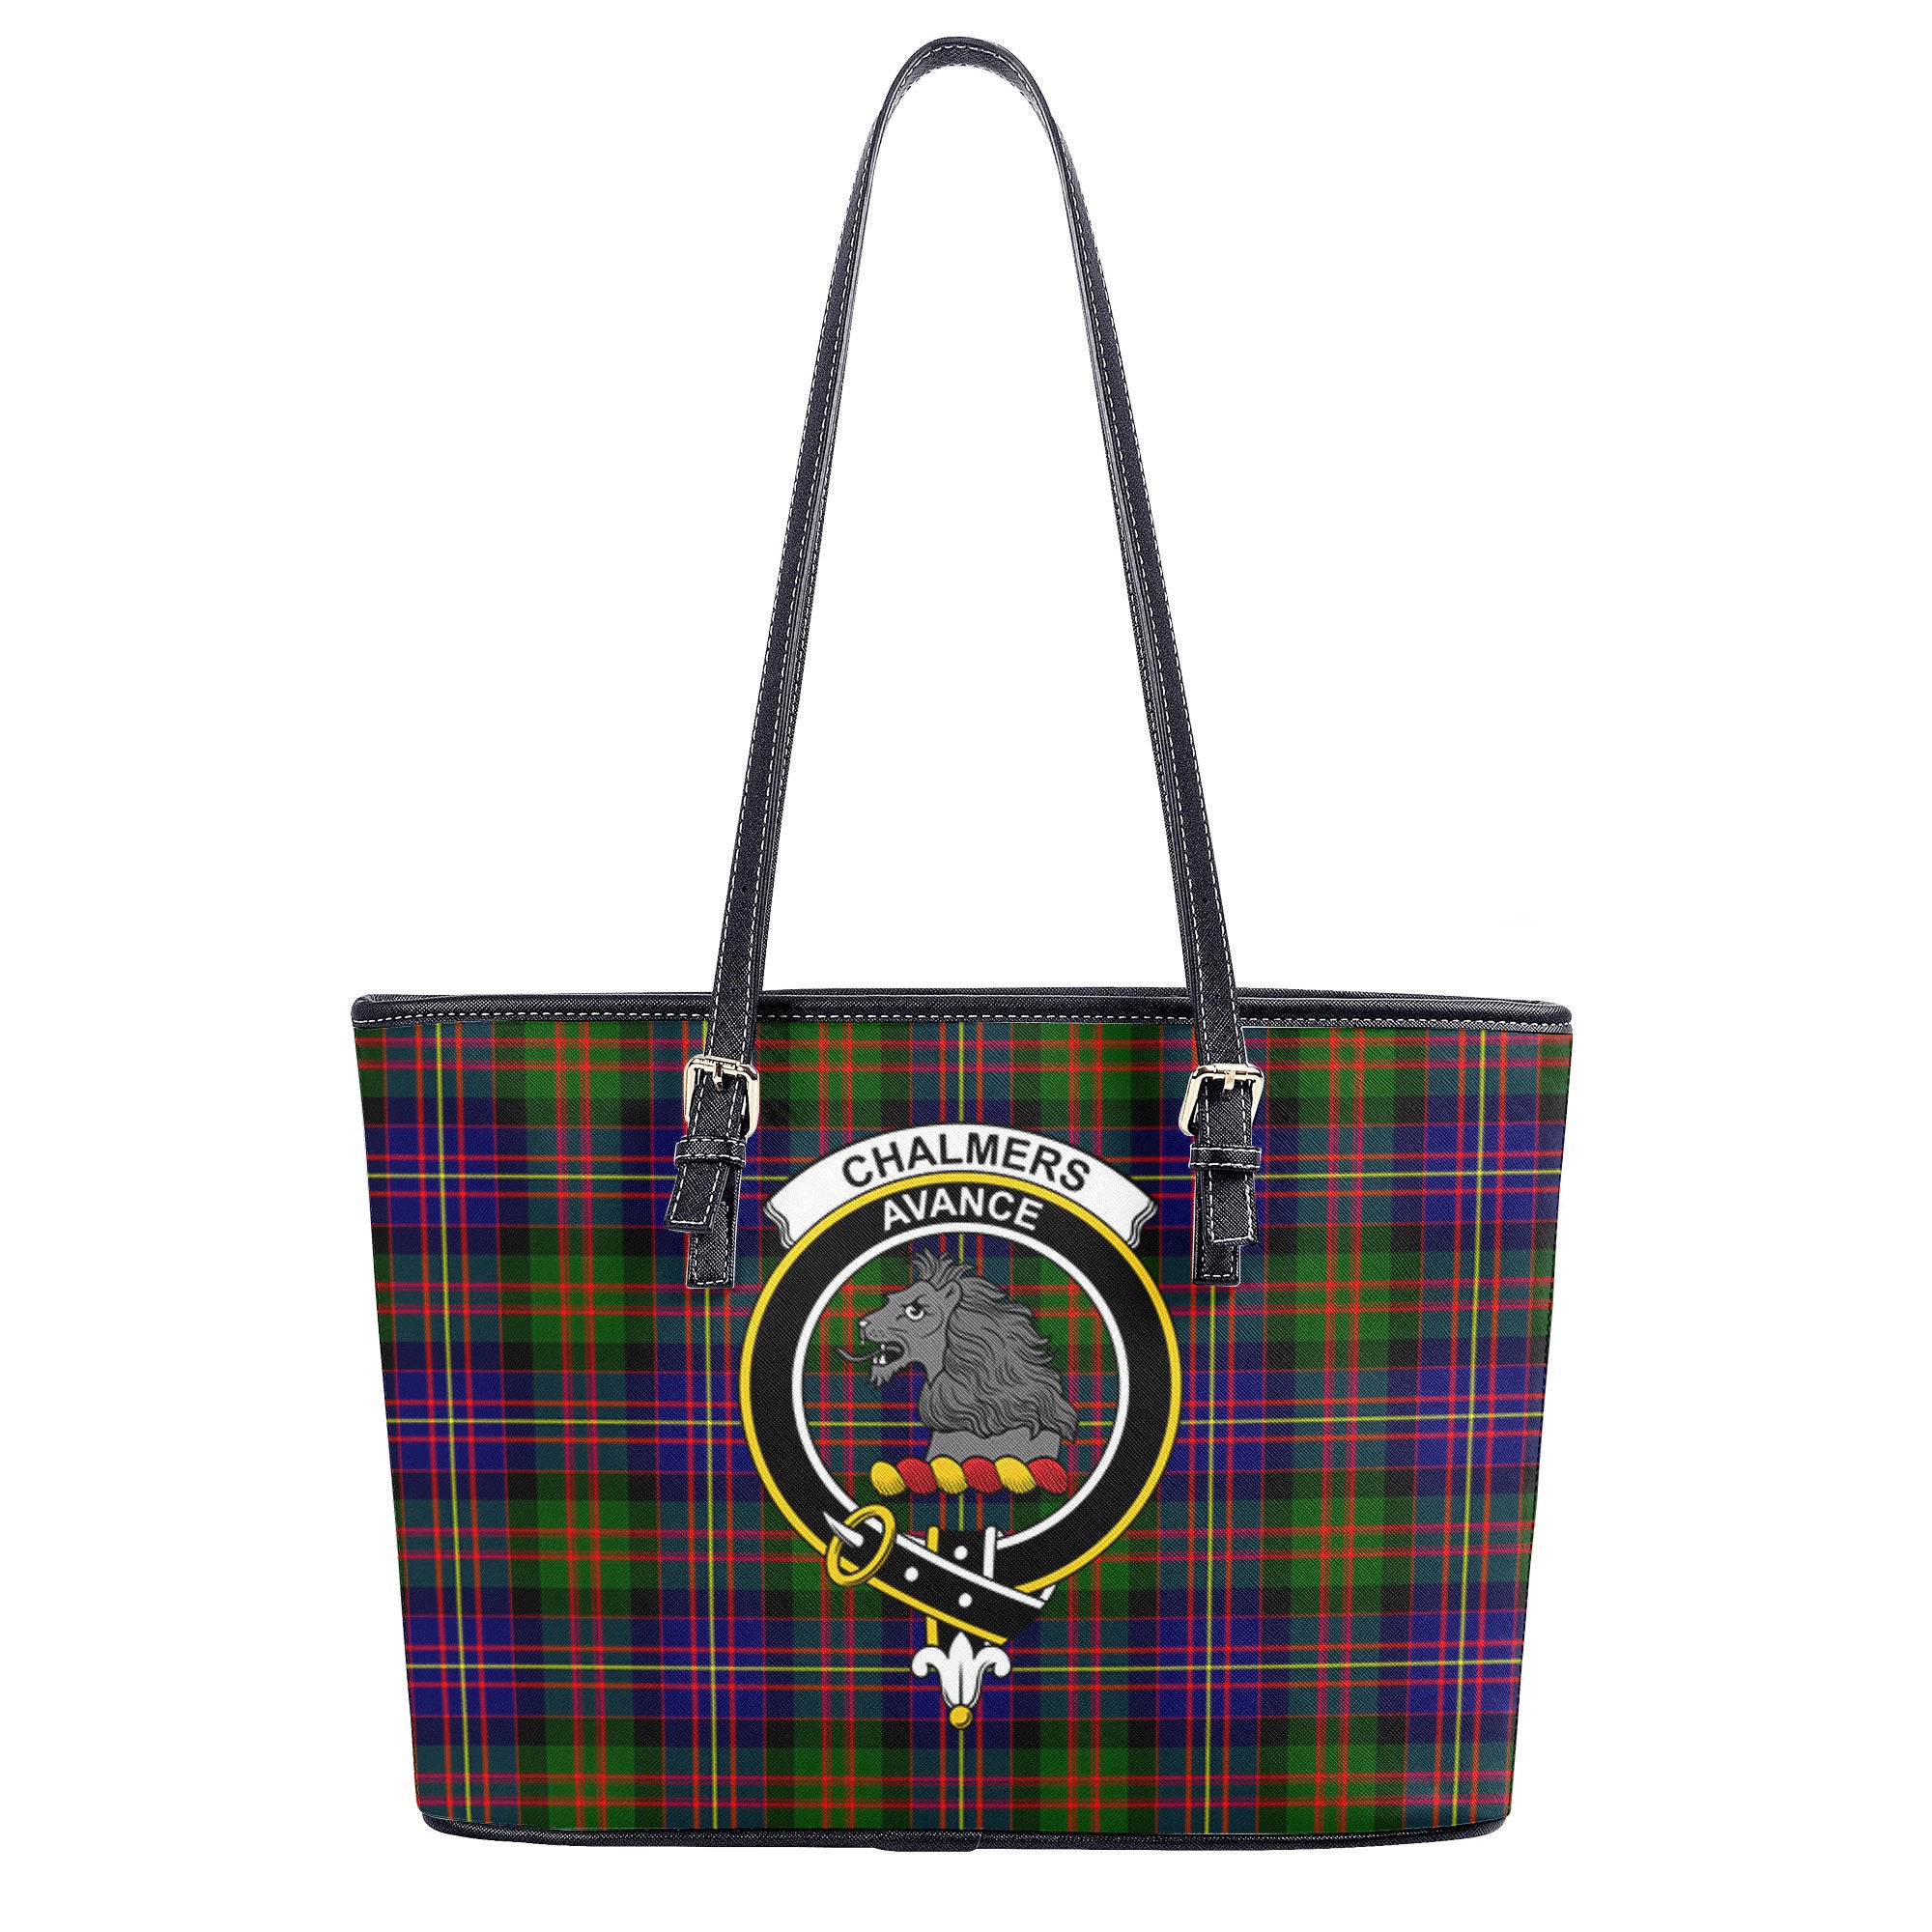 Chalmers Tartan Crest Leather Tote Bag